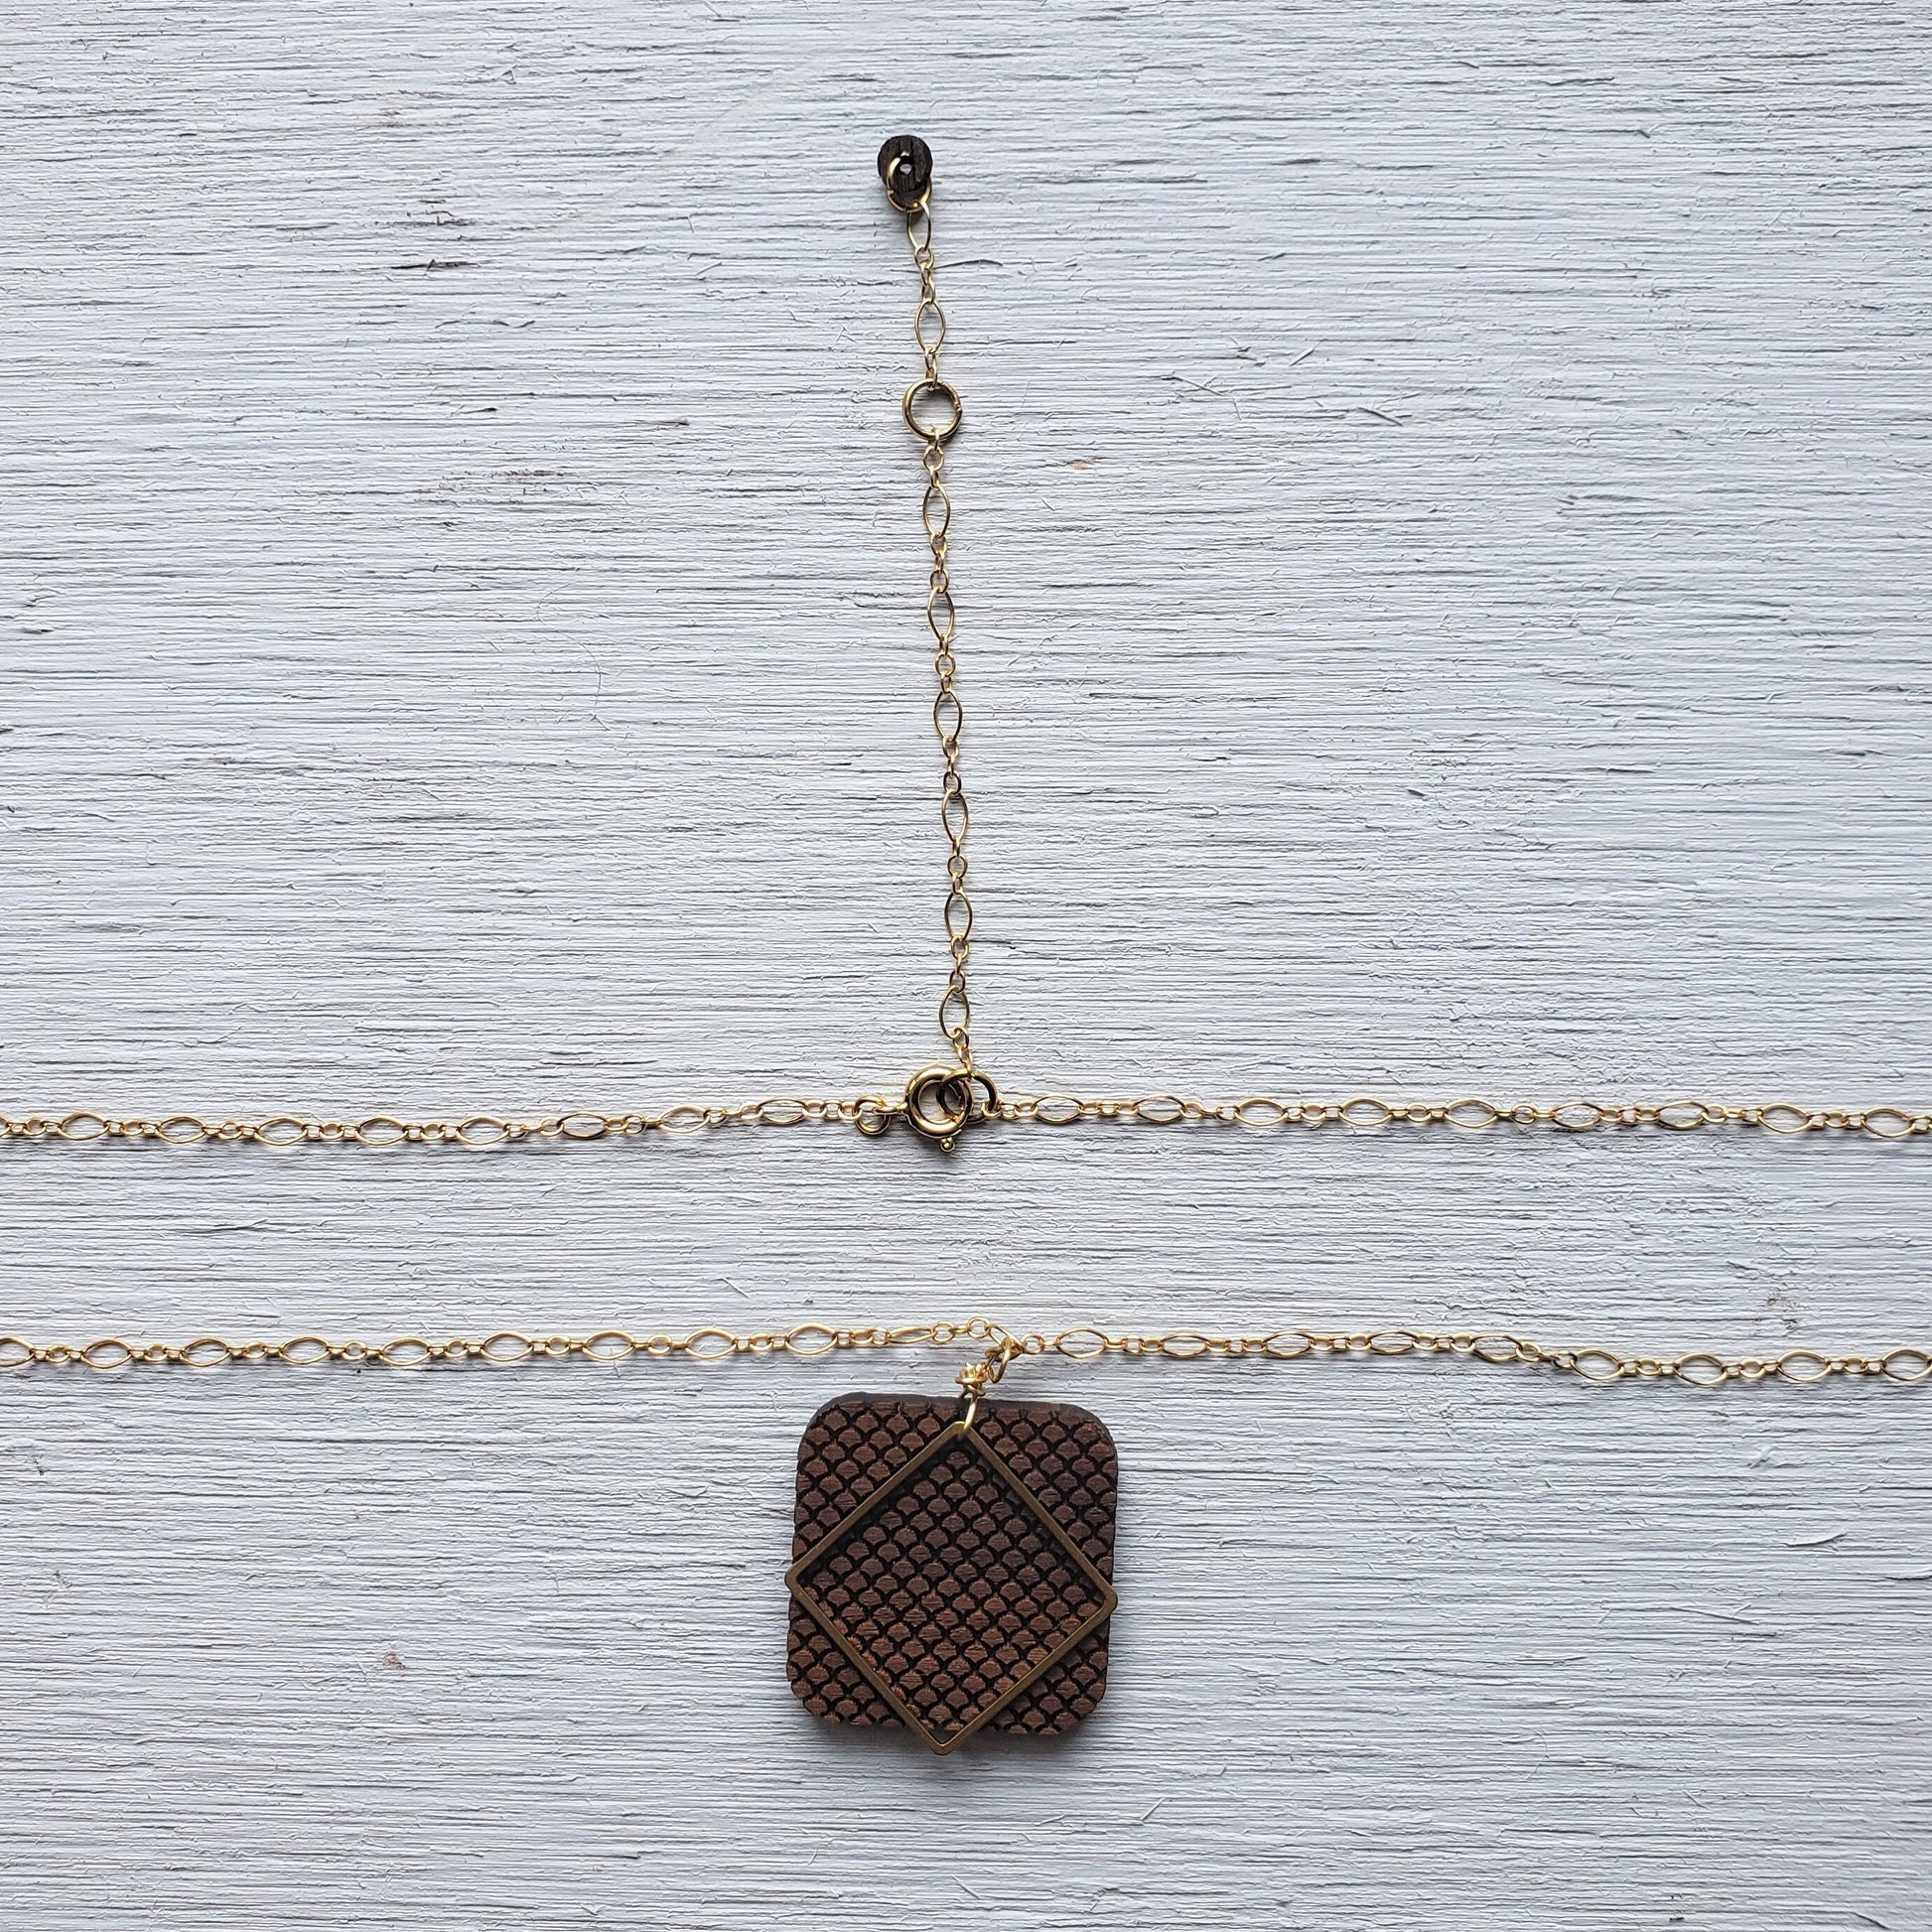 Scales Squared - Wooden Laser Cut Necklace || Modern Geometric Jewelry